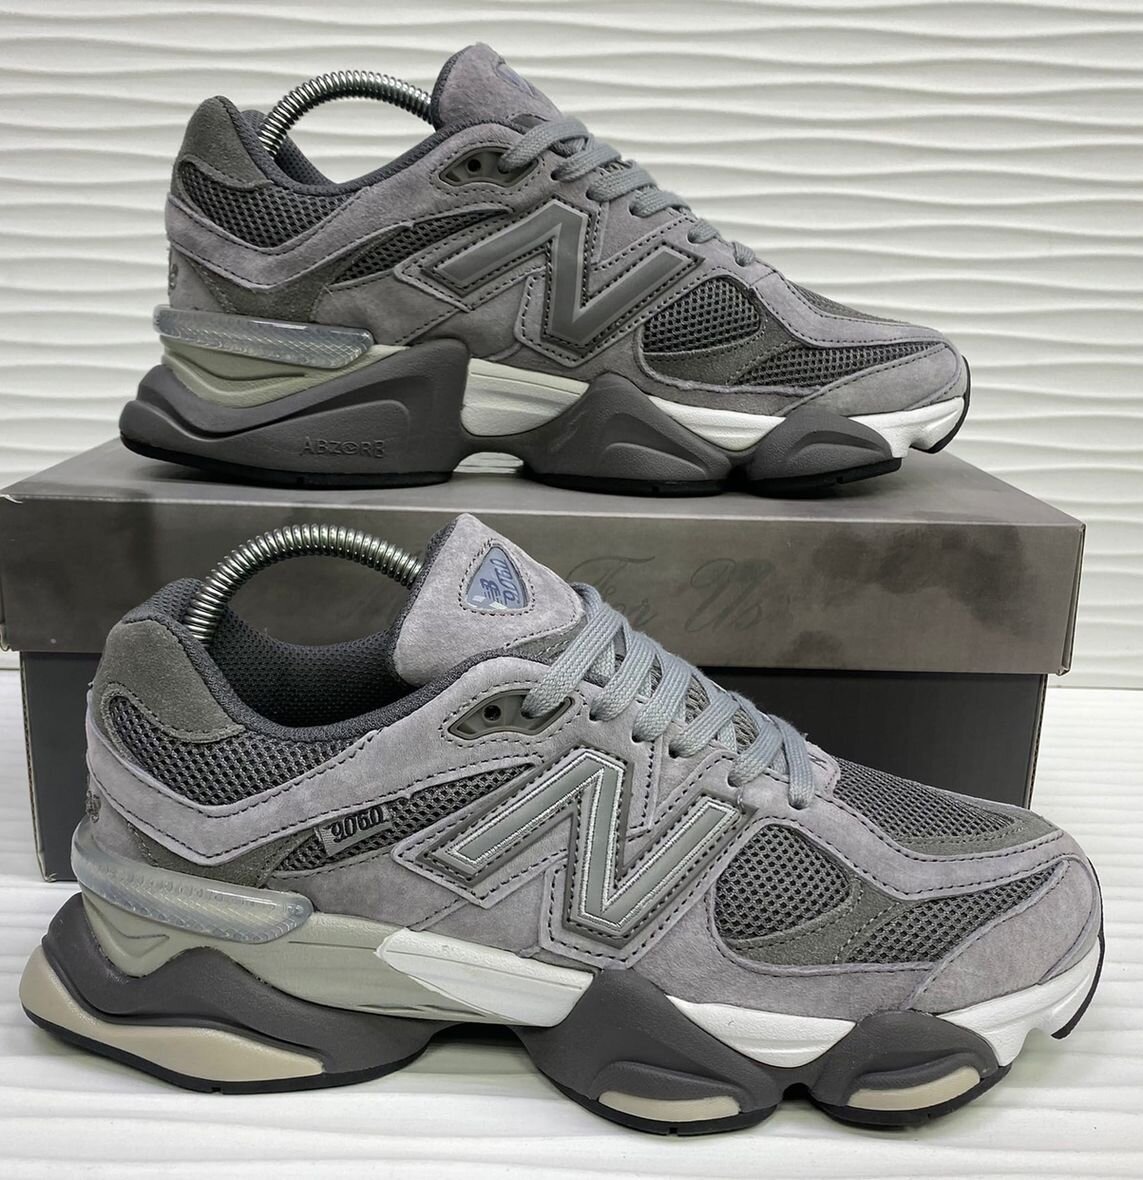 New Balance 9060 Grey: The Ultimate Bedroom Accessory